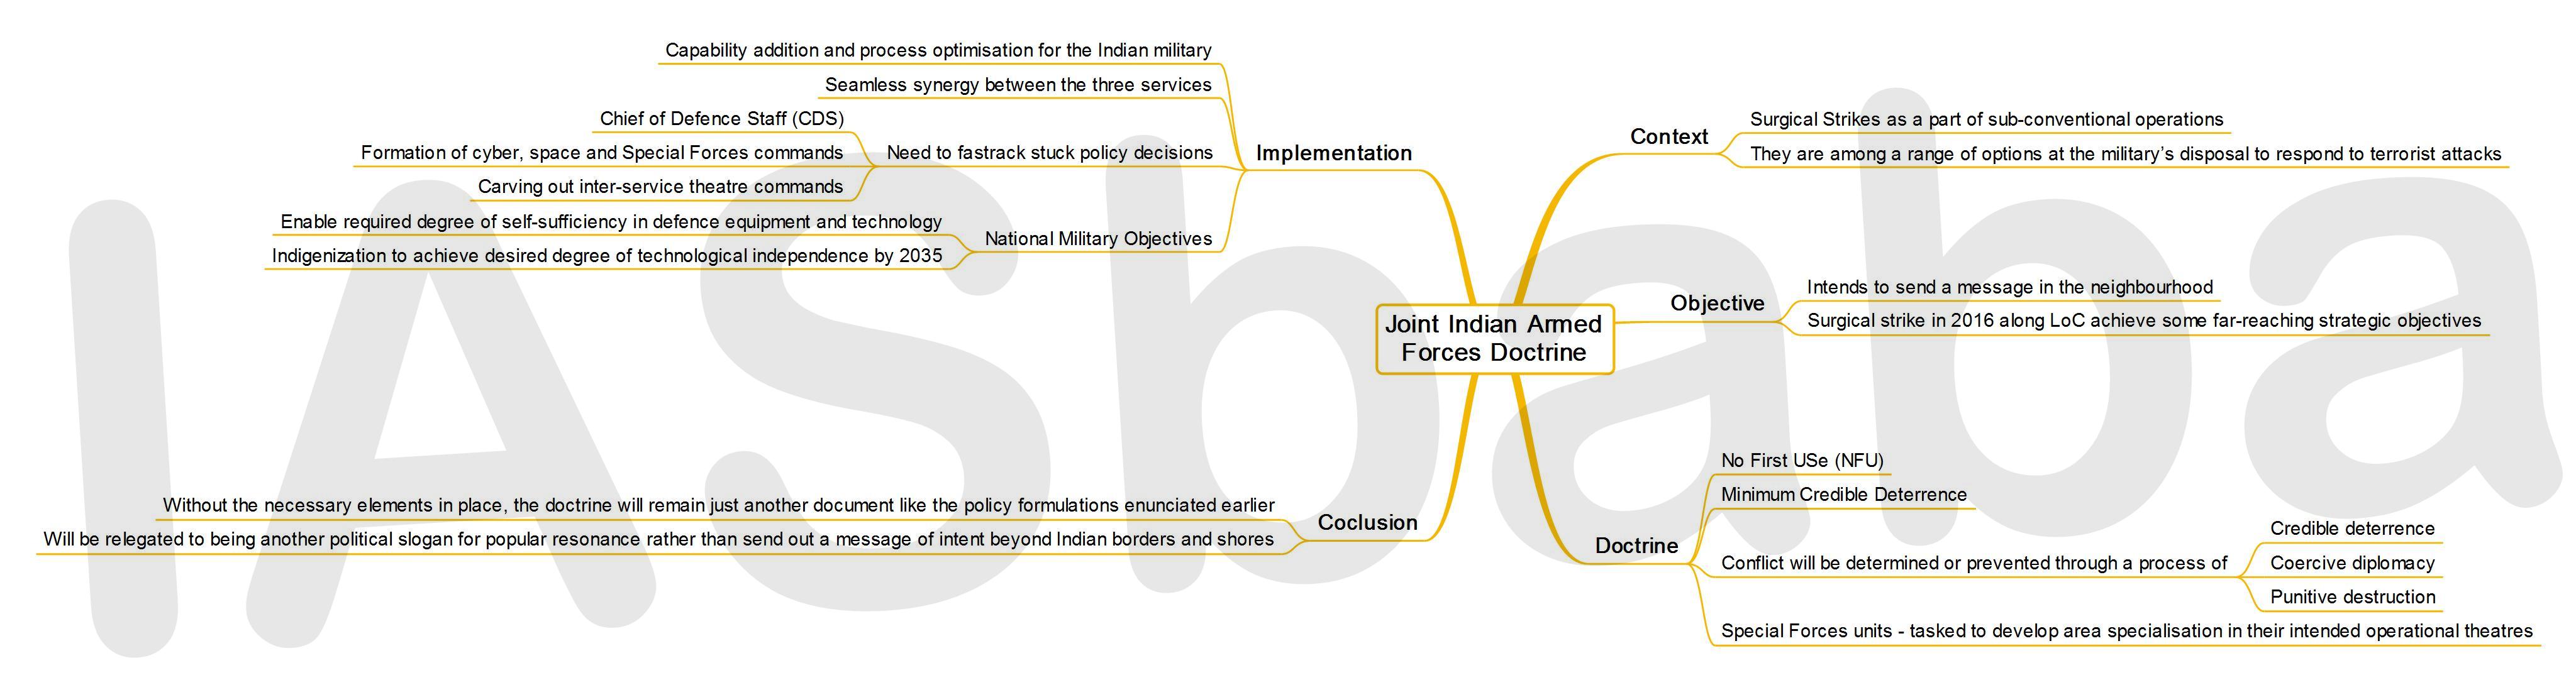 IASbaba’s MINDMAP : Issue - Joint Indian Armed Forces Doctrine